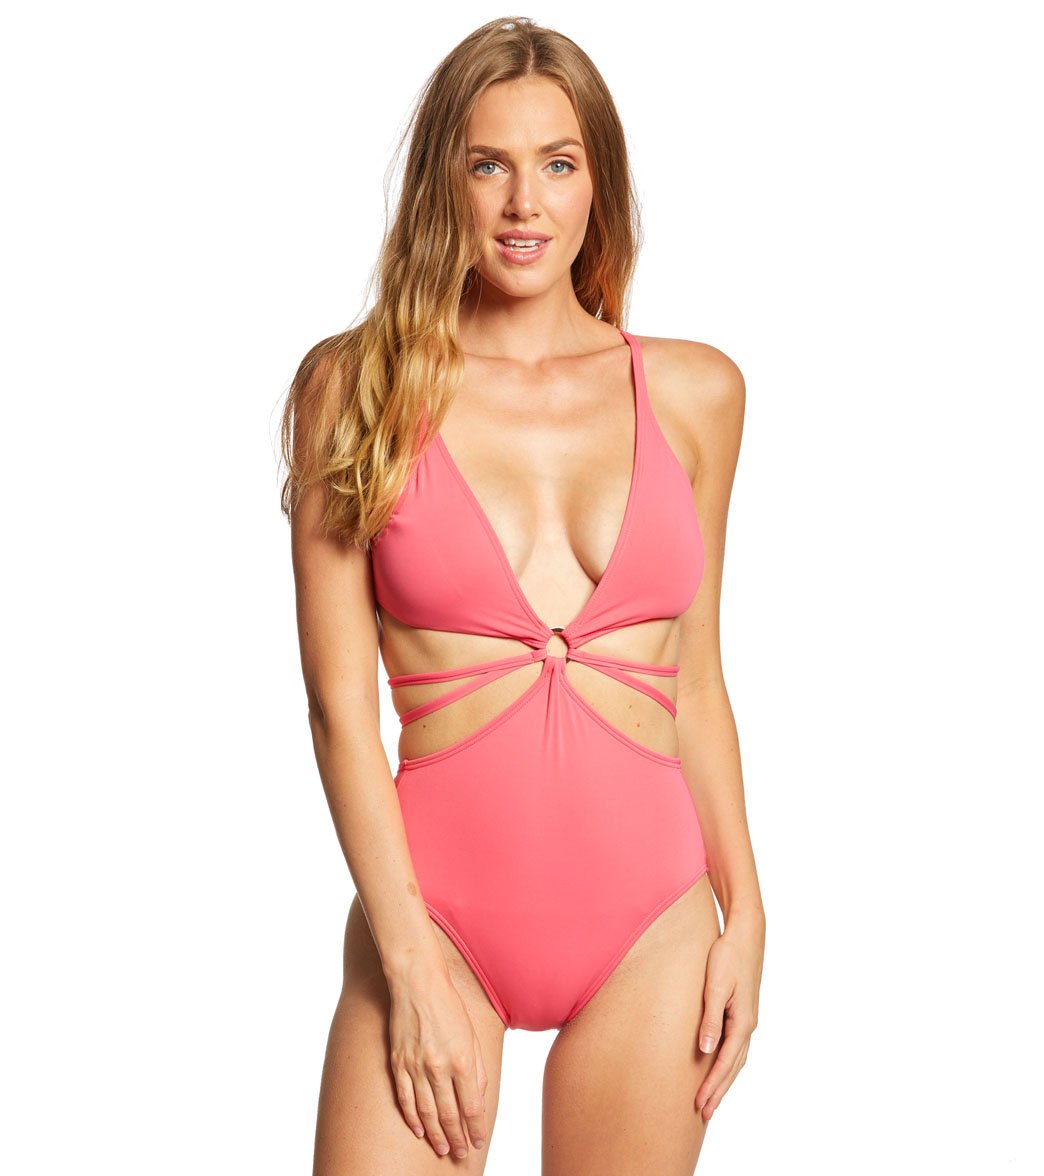 Vince Camuto Shore Shades Strappy One Piece Swimsuit - Hibiscus 10 - Swimoutlet.com